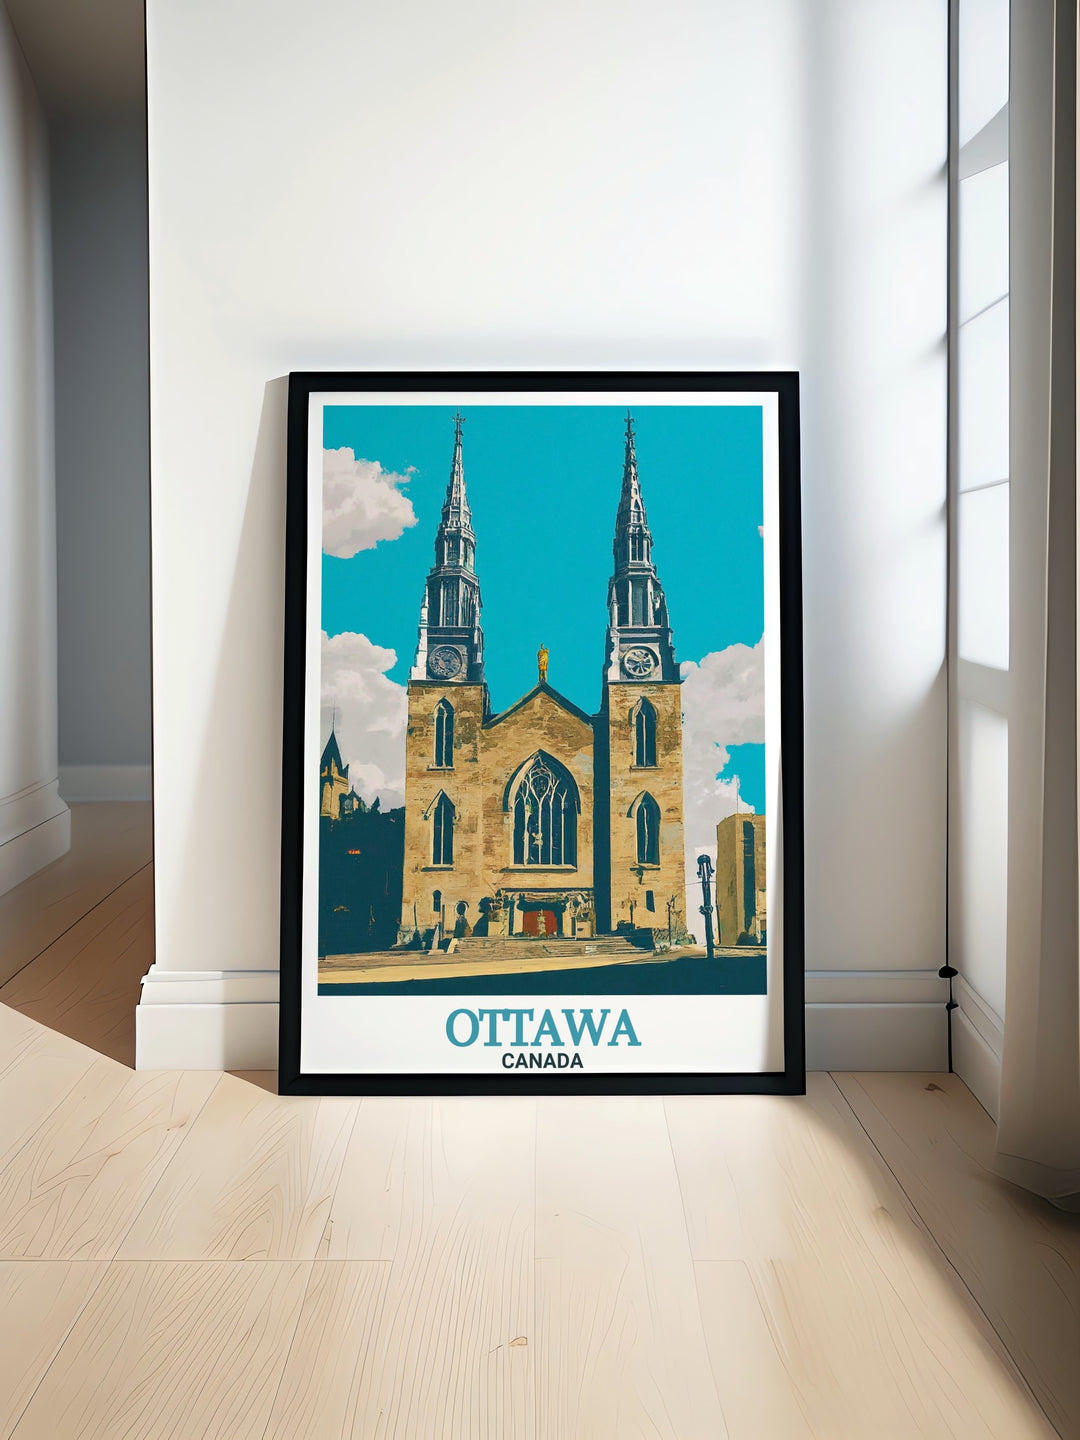 Ottawa Travel Poster Print featuring Notre Dame Cathedral Basilica. Perfect for home decor and travel enthusiasts. This artwork showcases Ottawas iconic landmark and offers a stunning visual of the cathedrals intricate design and historical significance.